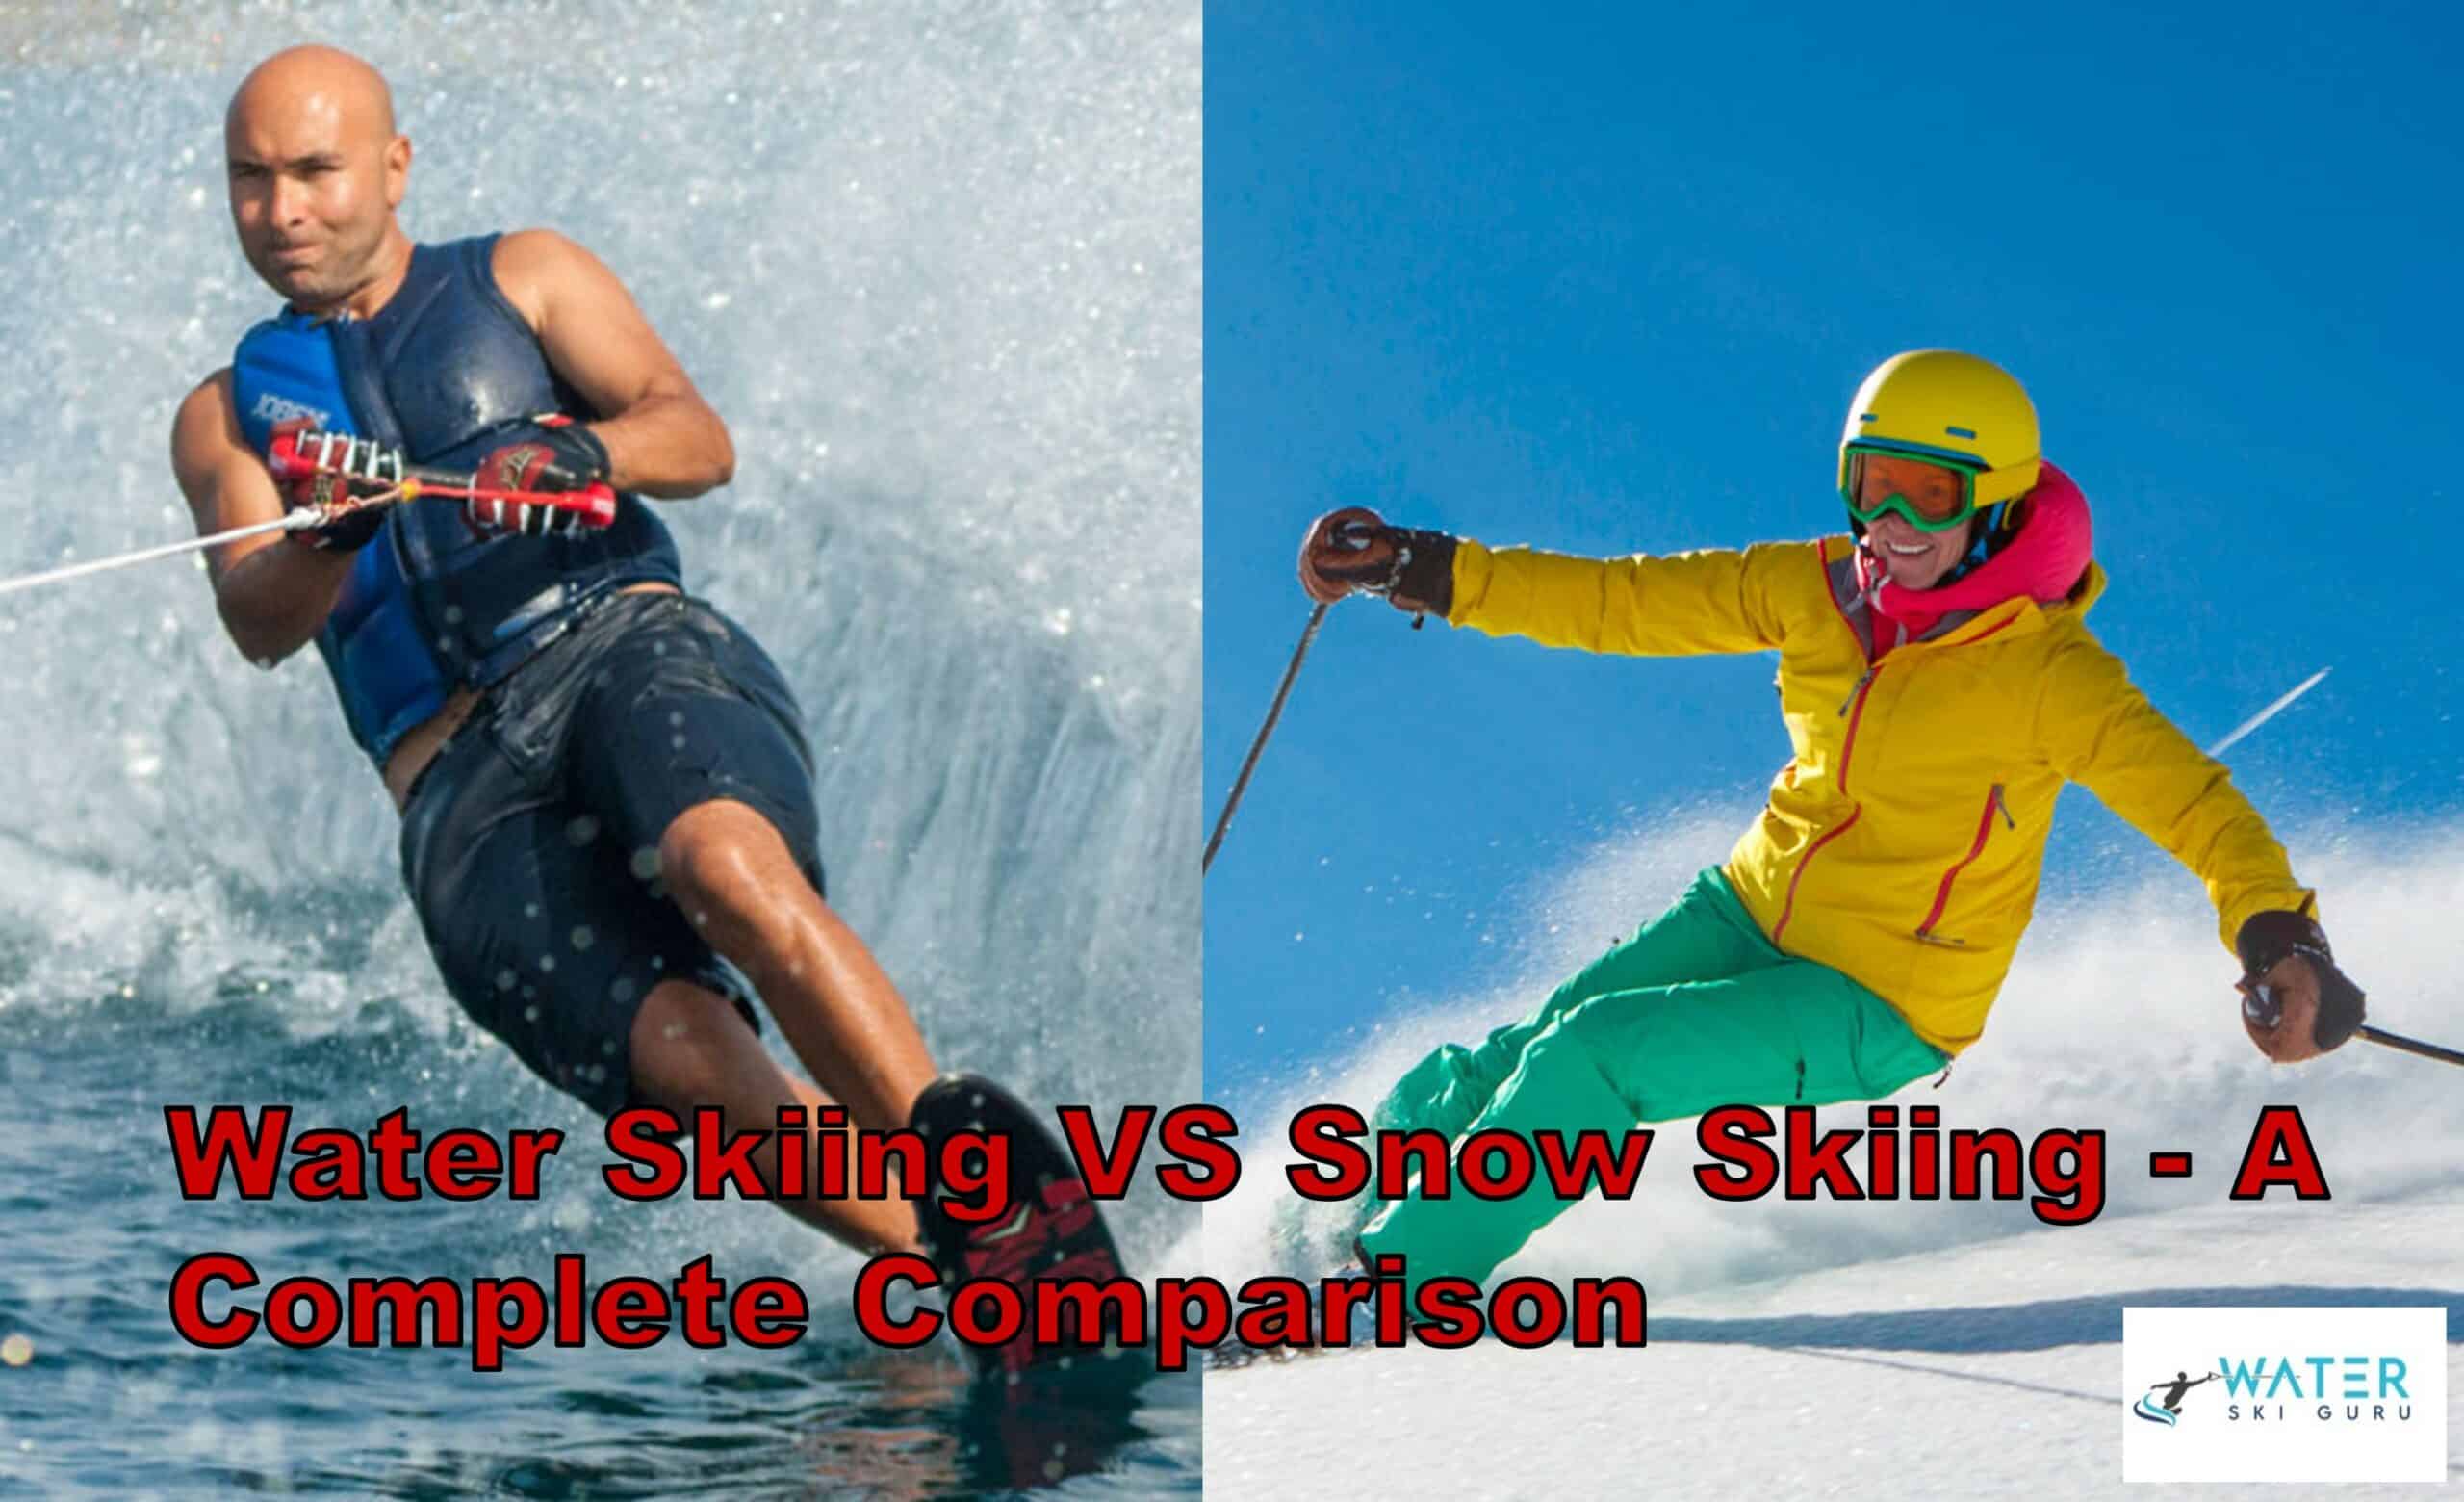 Water Skiing VS Snow Skiing - A Complete Comparison